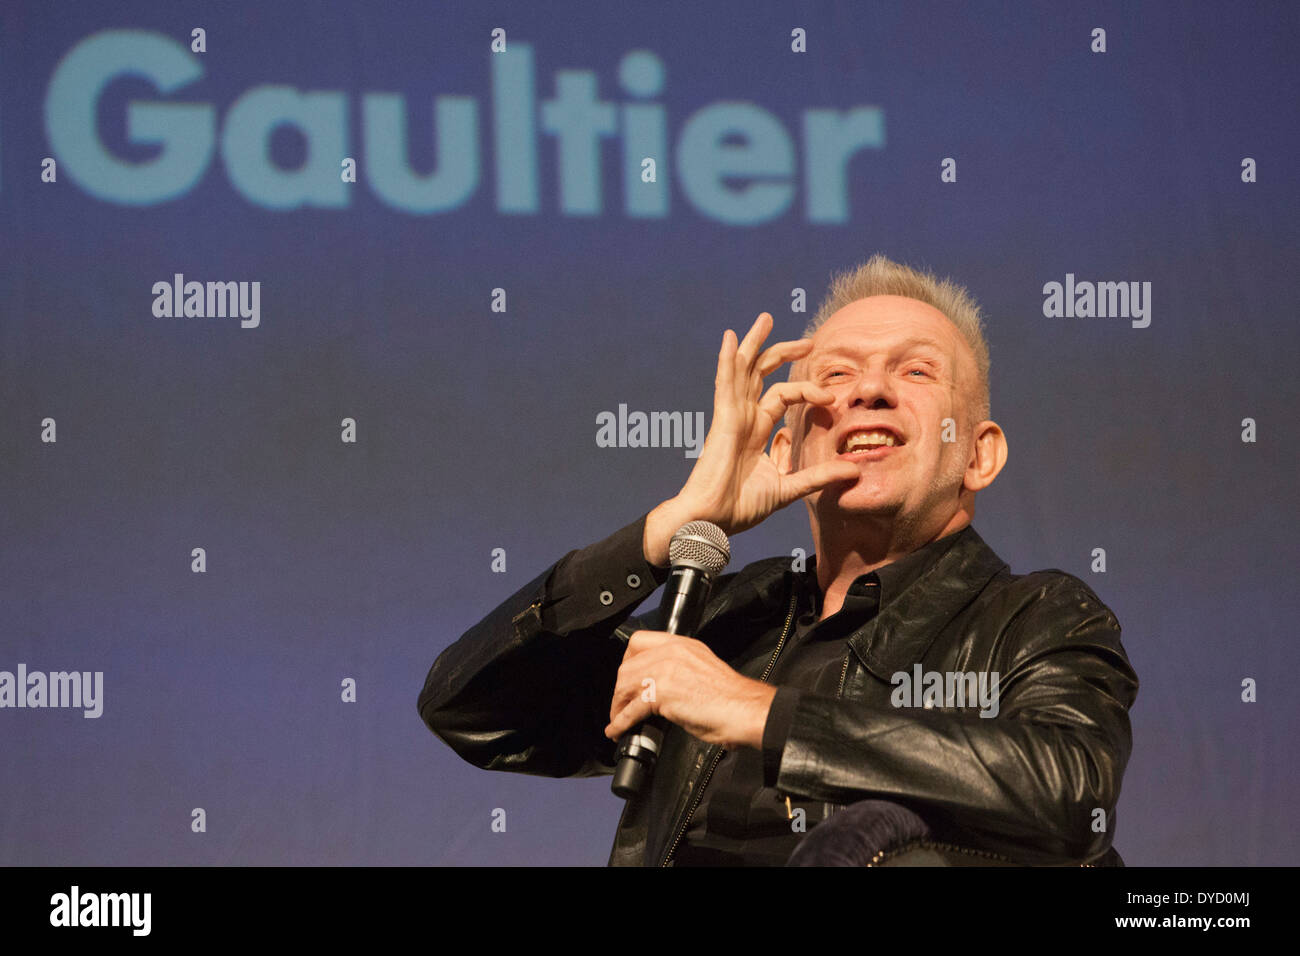 Jean Paul Gaultier opens his exhibition 'The Fashion World of Jean Paul Gaultier - From the Sidewalk to the Catwalk', London Stock Photo